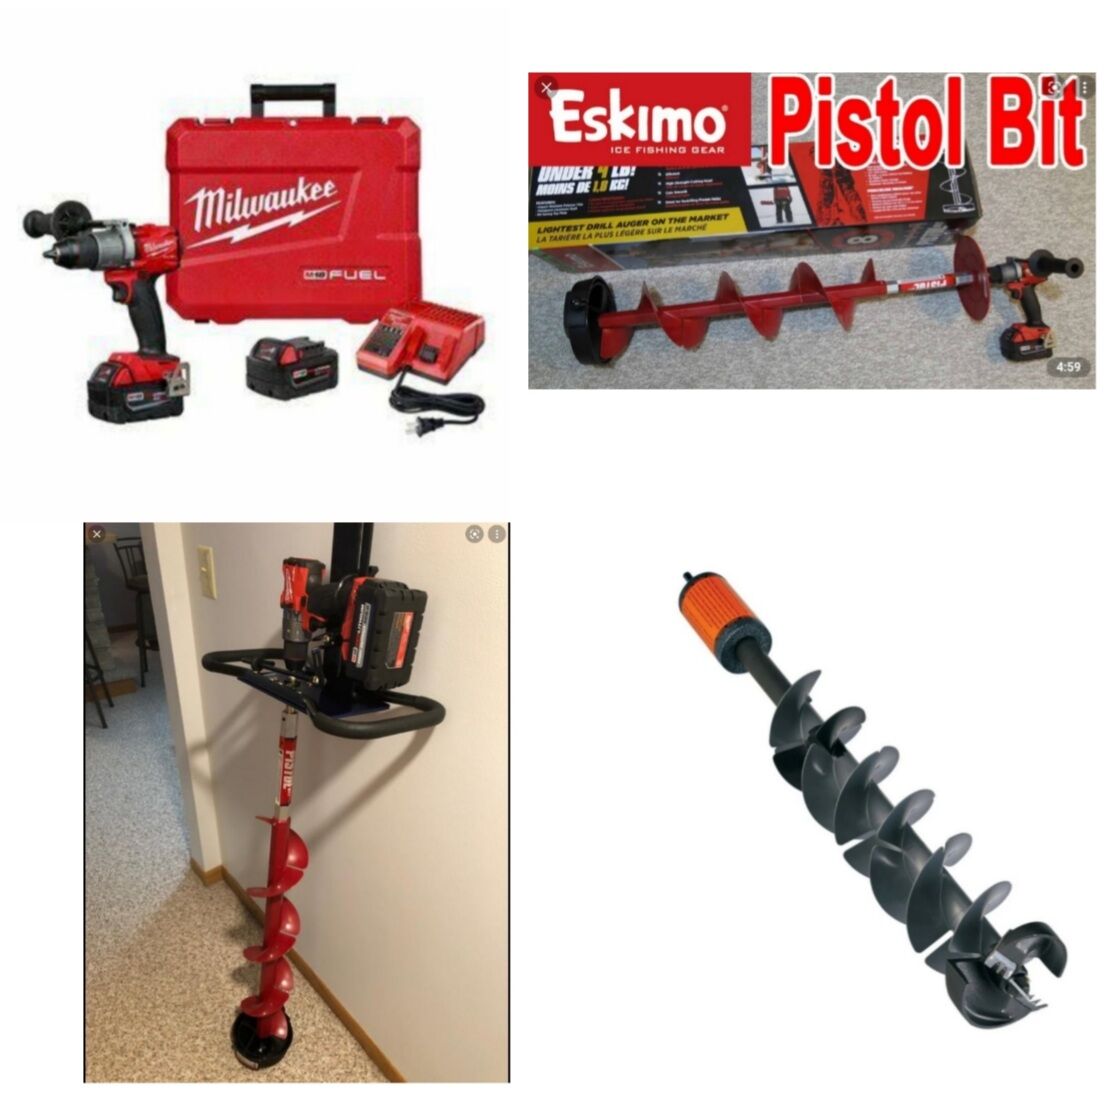 Electric Augers - Equipment-Expert Information - MN - Outdoor Minnesota  Fishing Reports - Hunting Forum - Ice Fishing